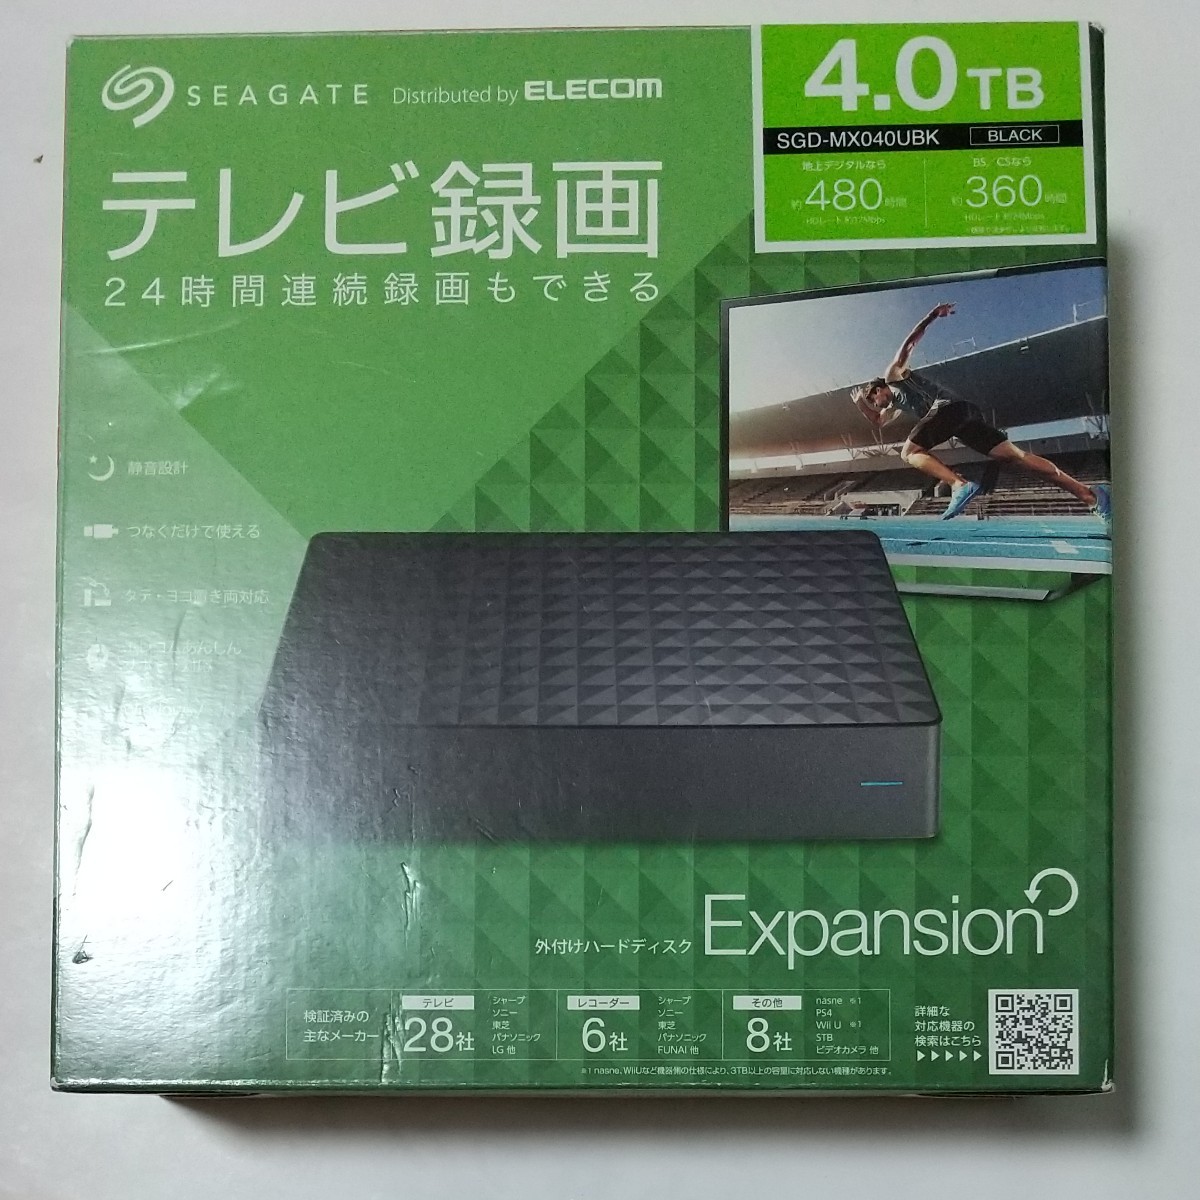 Seagate Expansion SGD-MX040UBK HDD 4.0TB